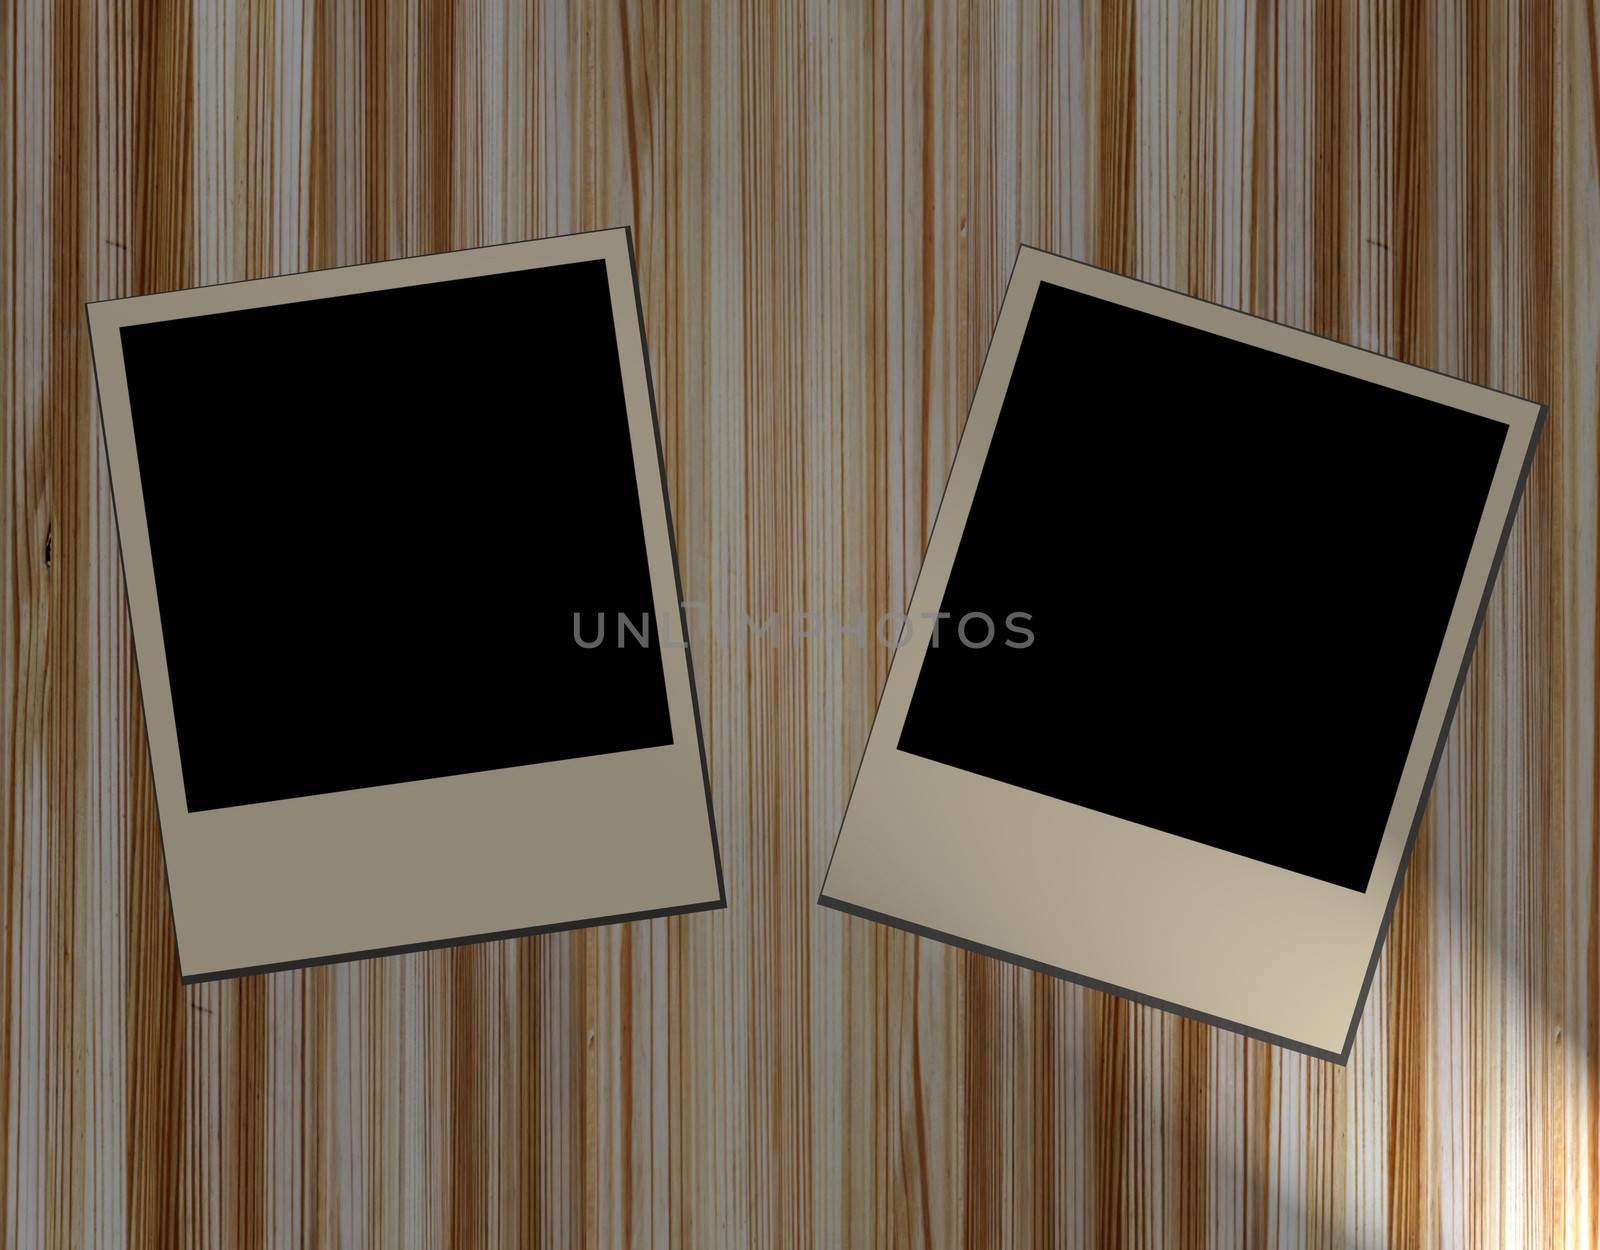 Blank old picture frames  on wooden background